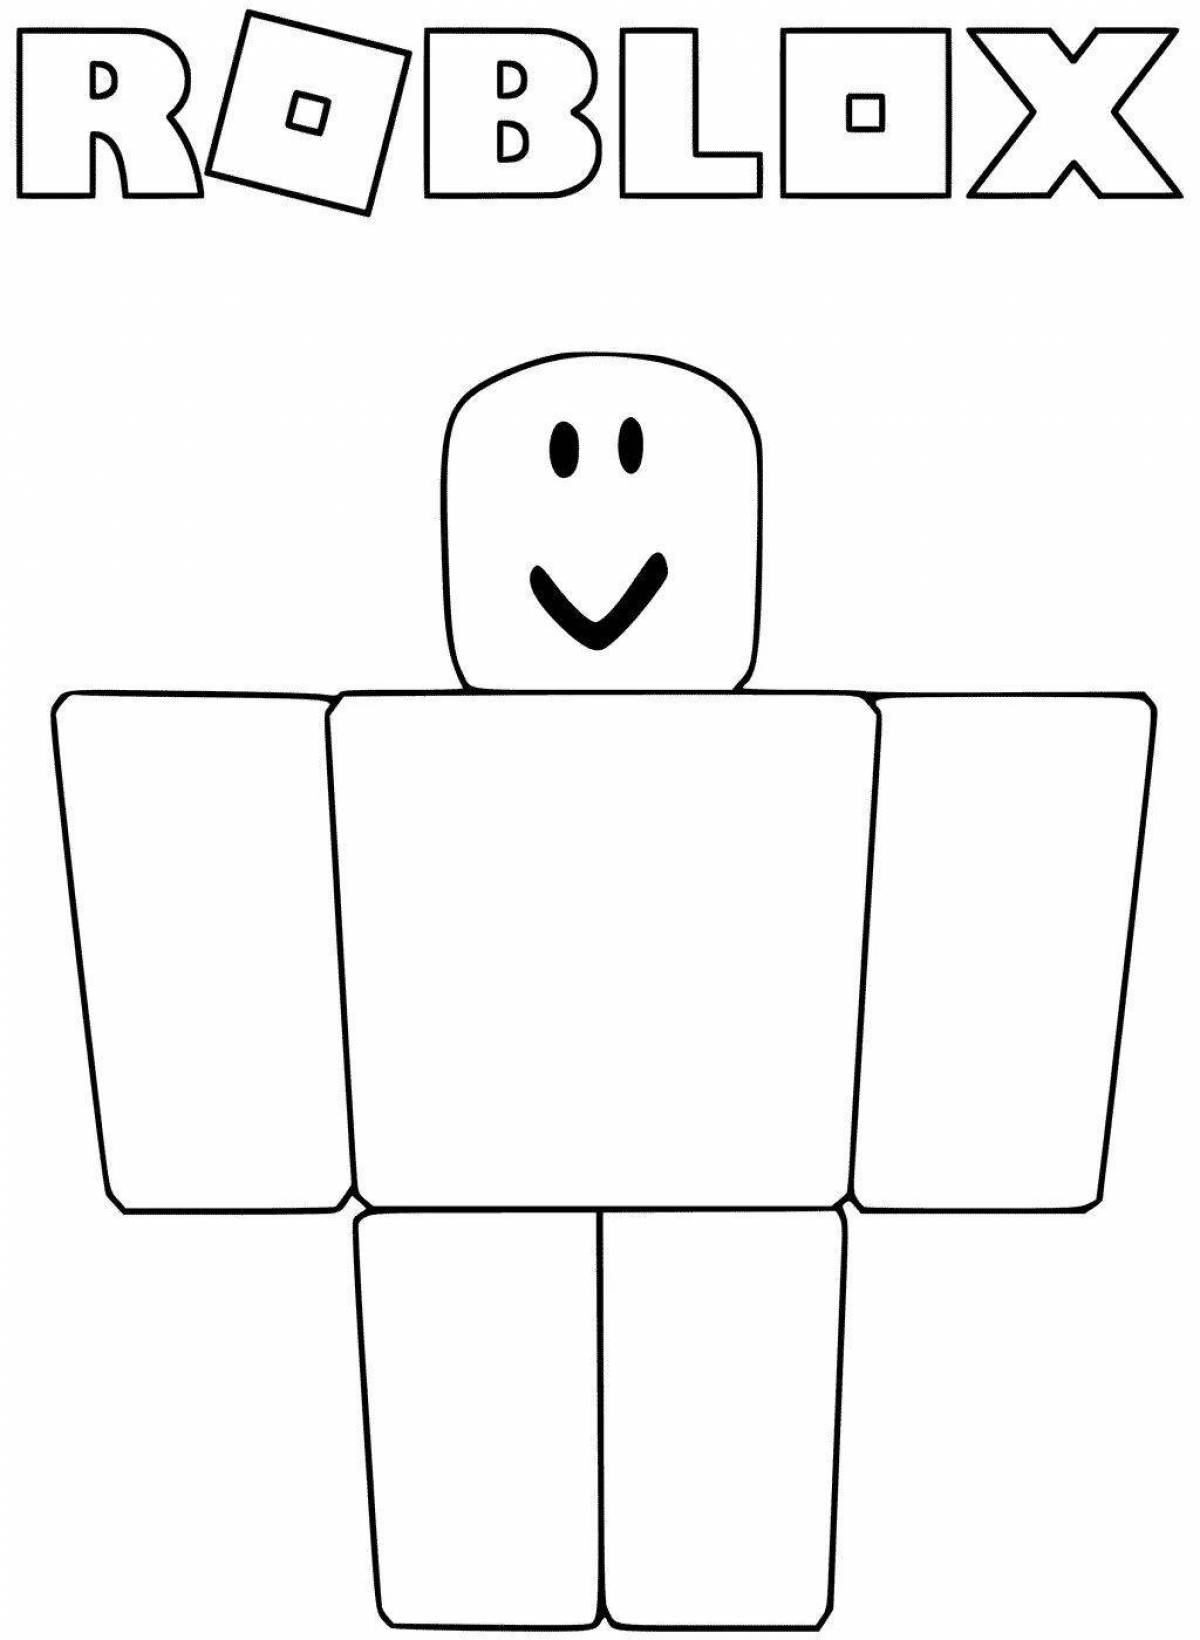 Color-lively roblox player coloring page